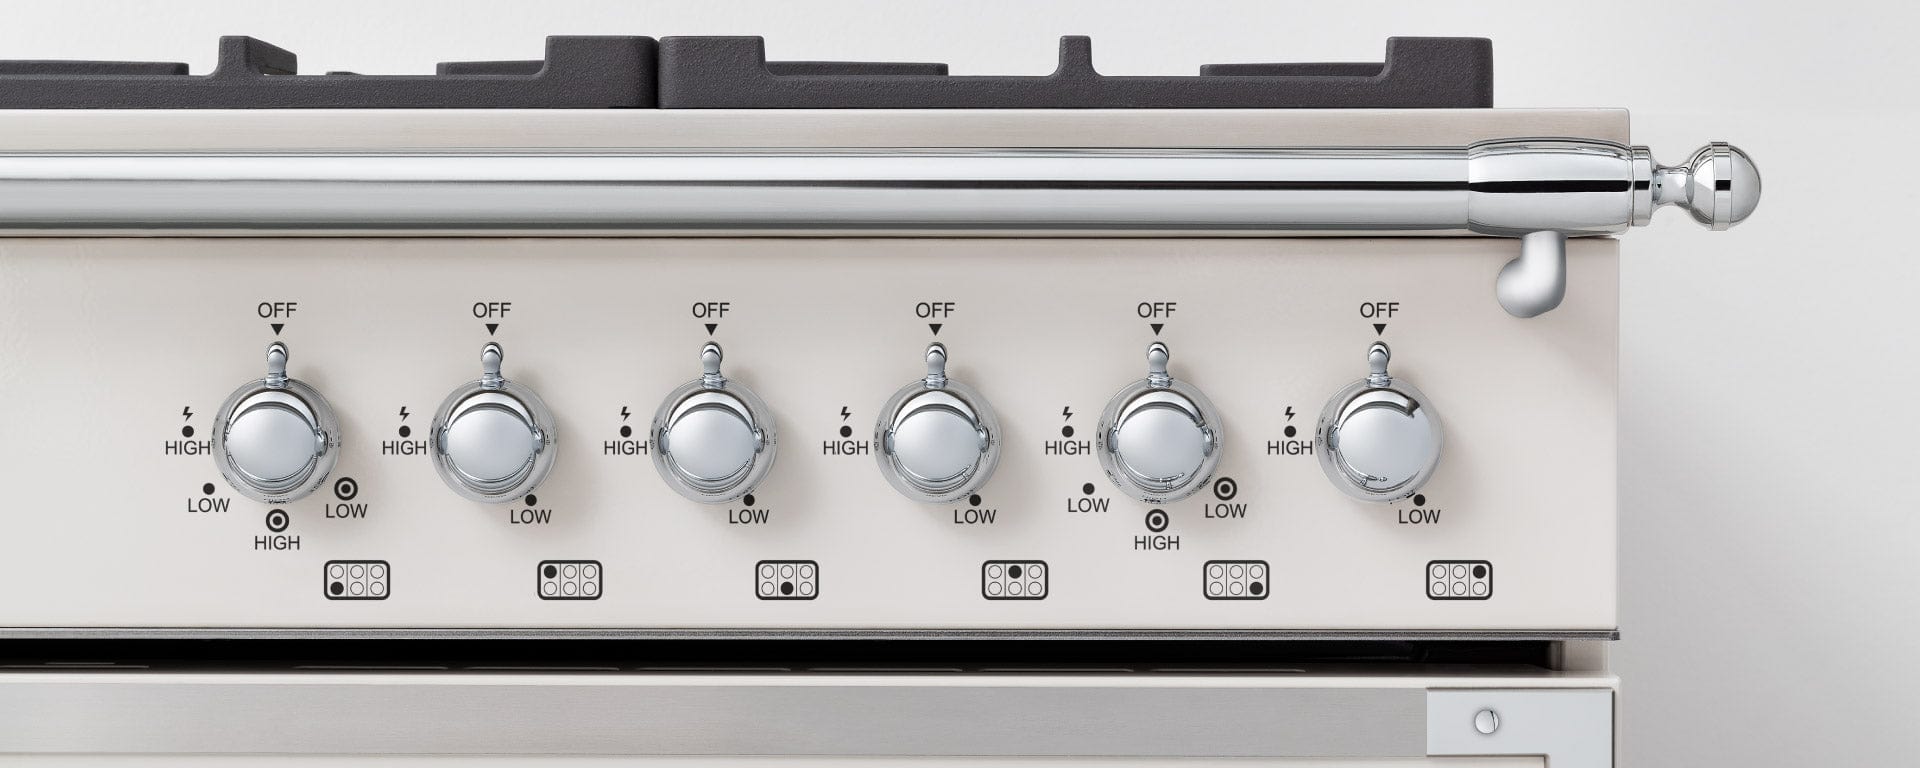 Bertazzoni Heritage Series 36" 6 Brass Burners Stainless Steel Dual Fuel Range With 5.7 Cu.Ft. Electric Self-Clean Double Oven and Cast Iron Griddle HER366BCFEPXT Luxury Appliances Direct